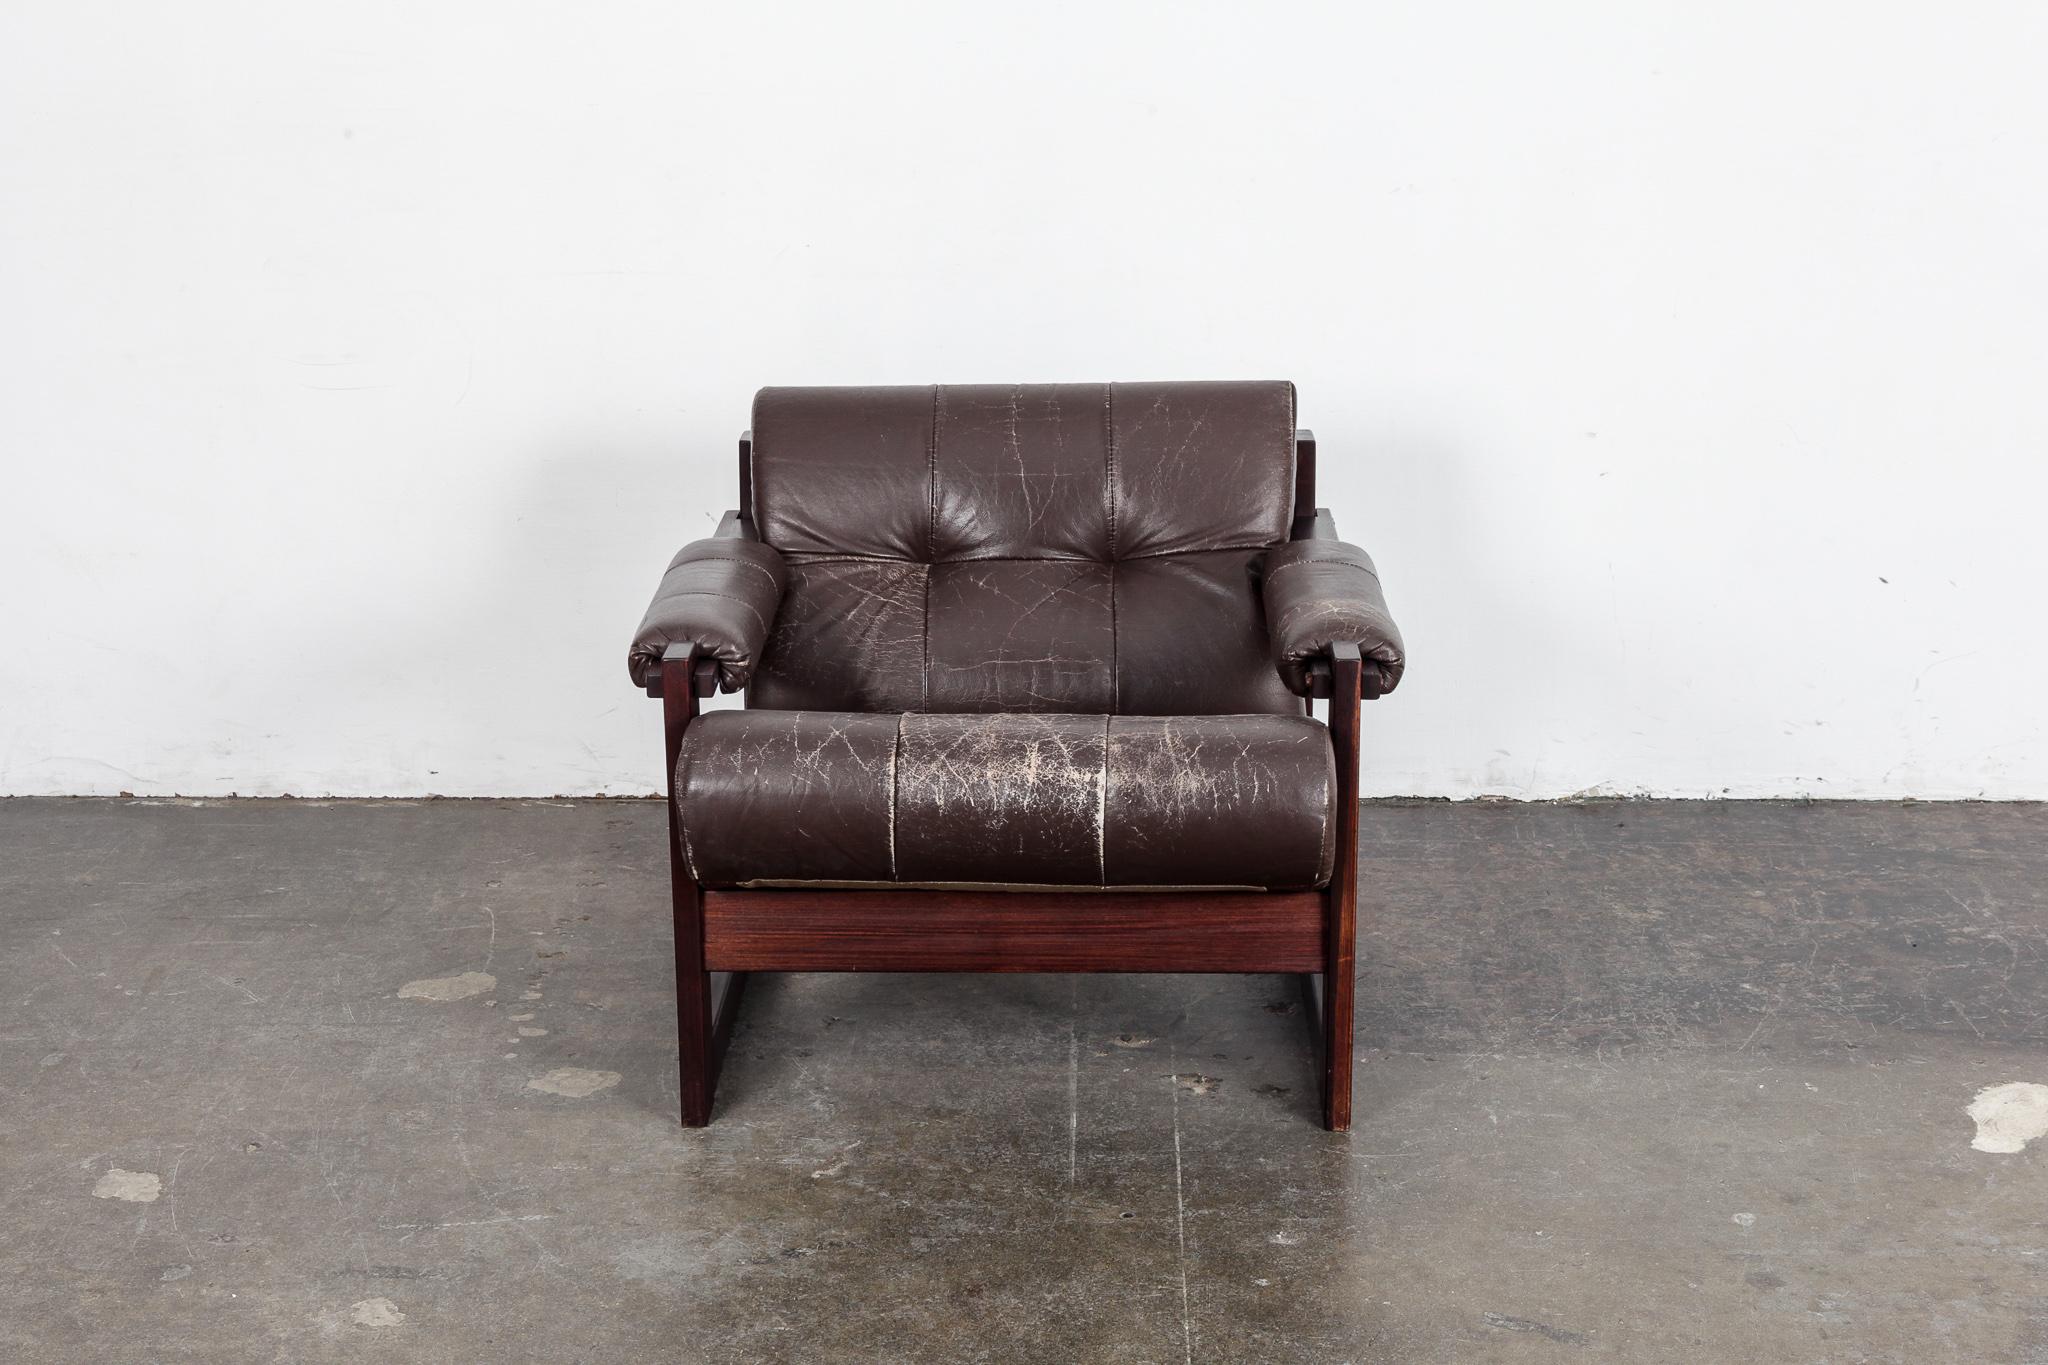 Single vintage Brazilian lounge chairs by Percival Lafer in original dark brown leather with jatoba wood frames, model MP-167. Leather shows nice patina but no damage. Made by Later MP, Brazil, 1960s.